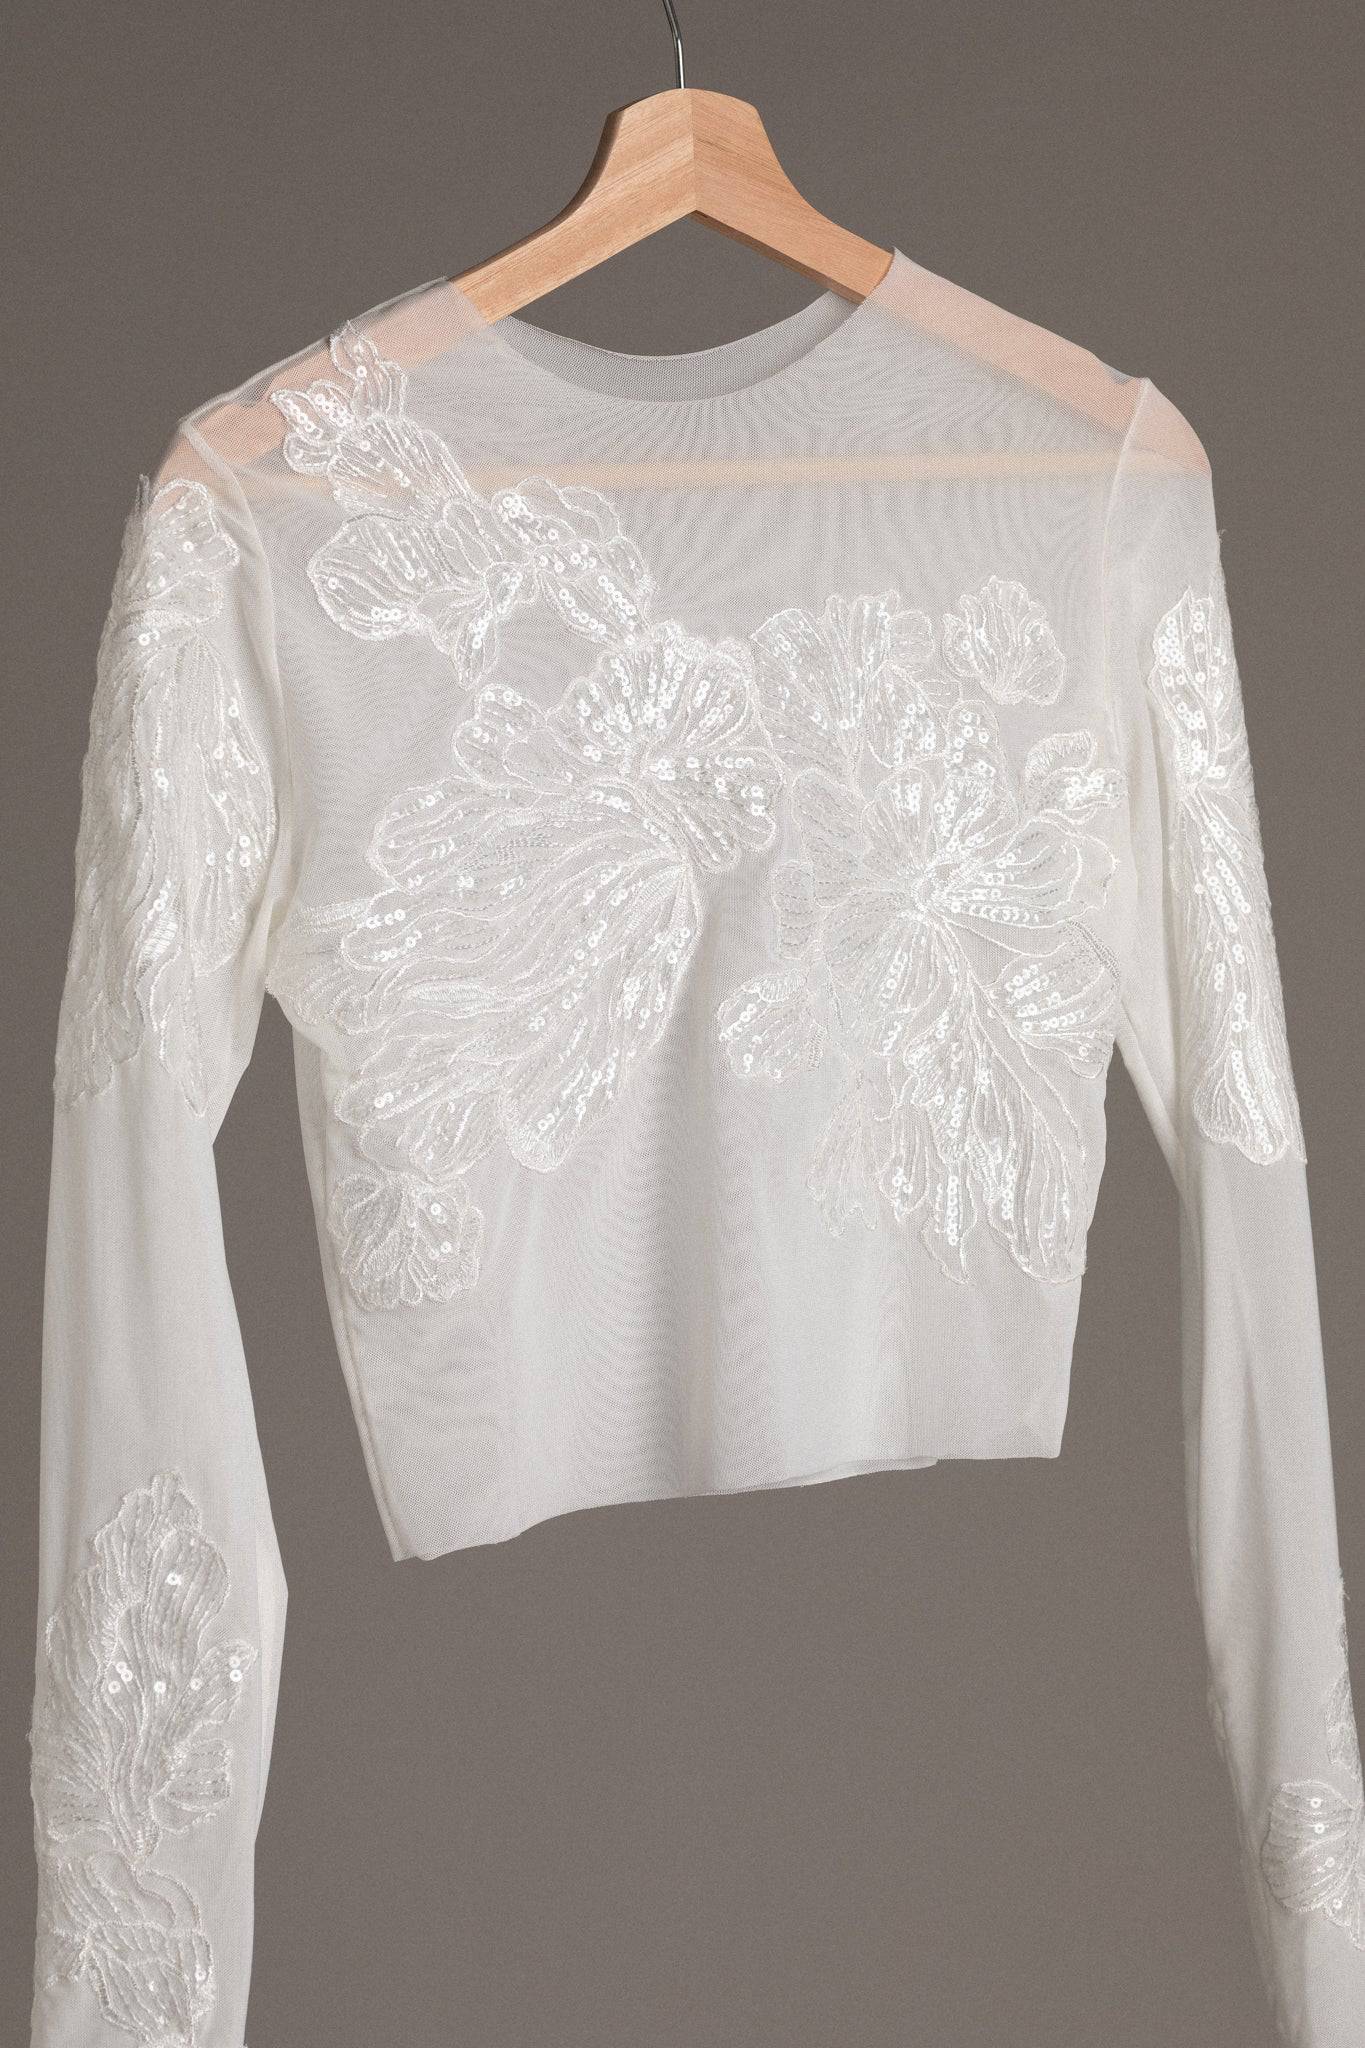 LONG SLEEVE FRENCH LACE MESH TOP